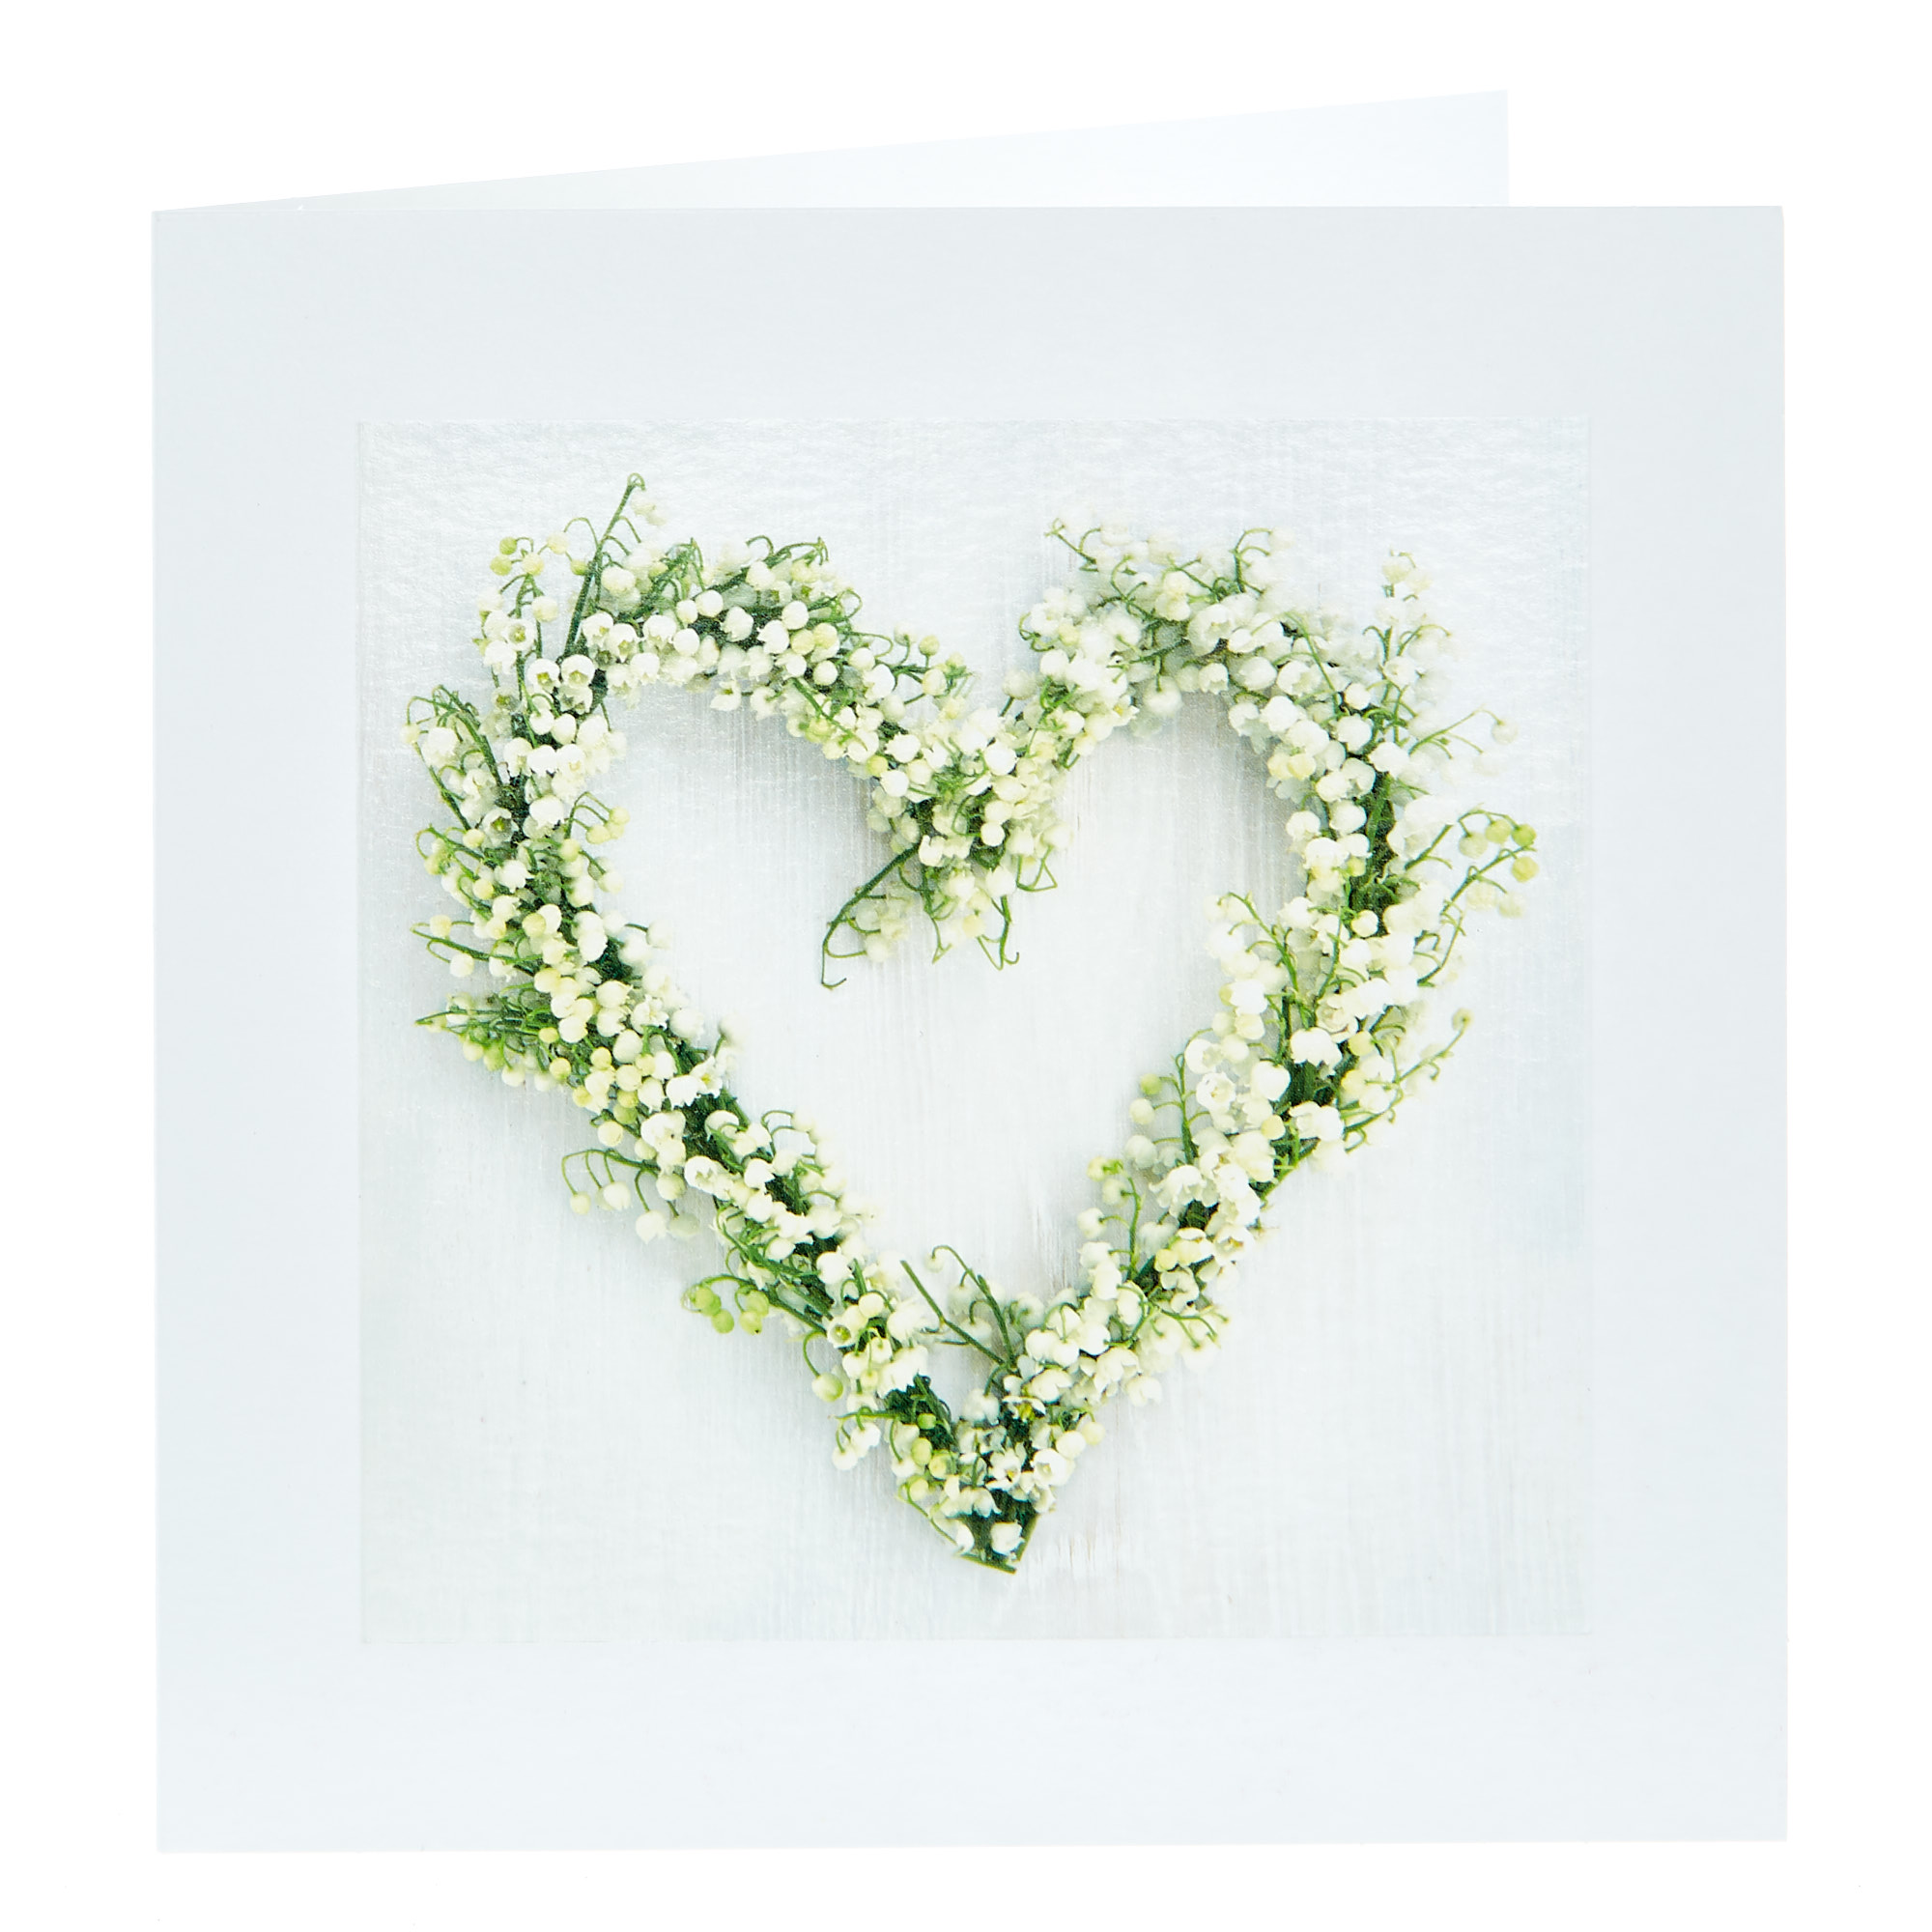 Any Occasion Card - Heart Wreath